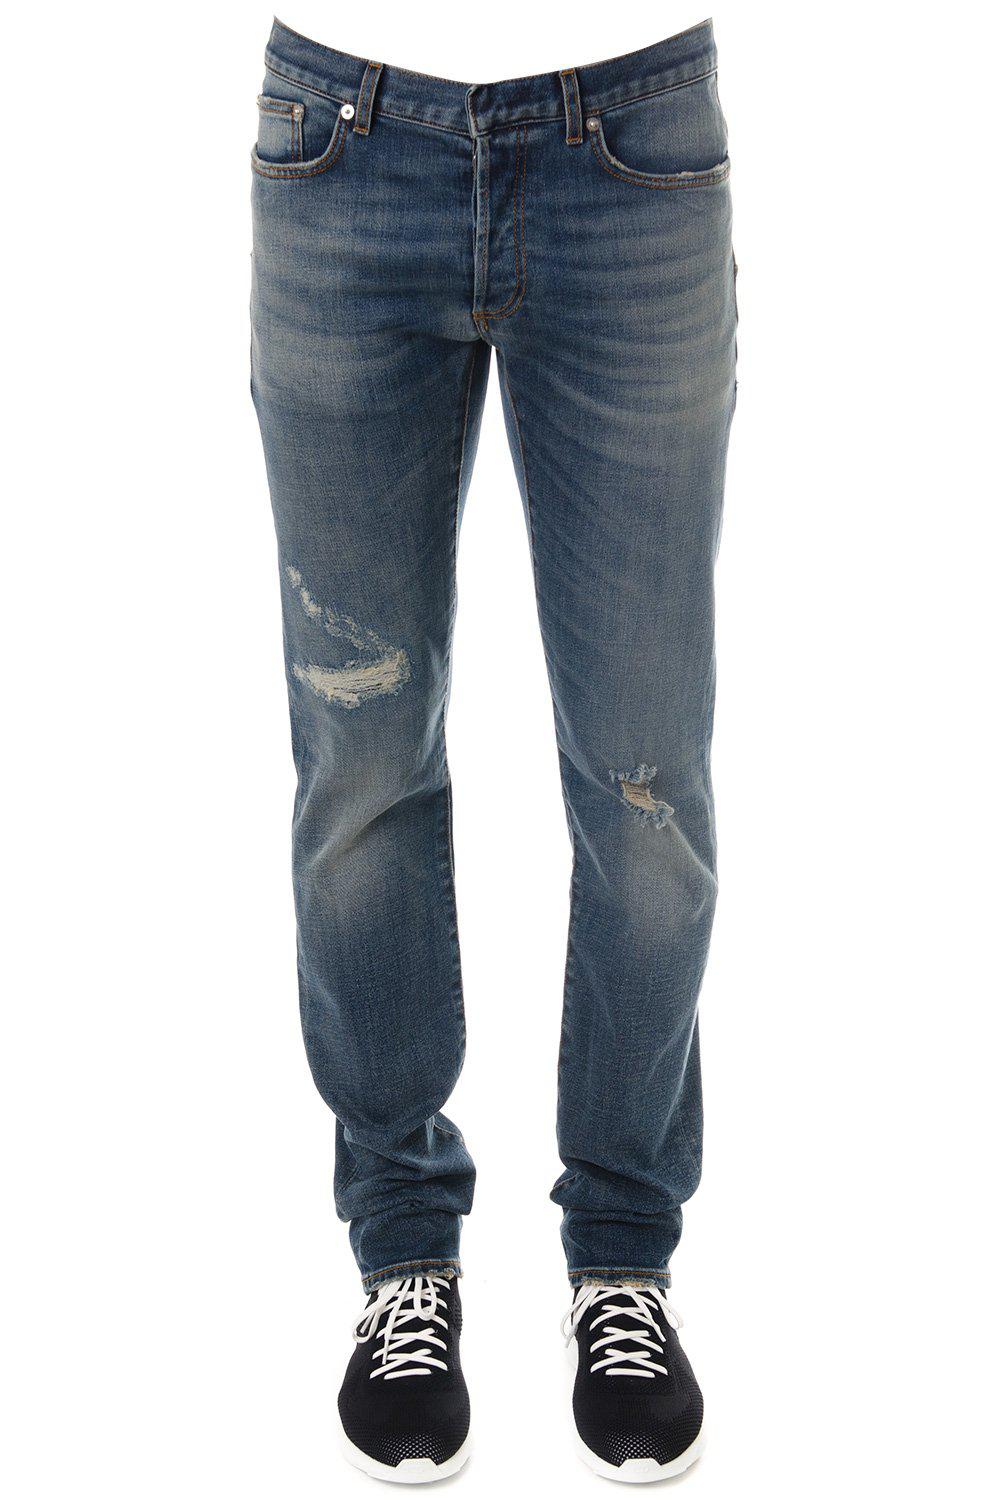 Dior Homme Stone Wash Ripped Jeans In Blue | ModeSens